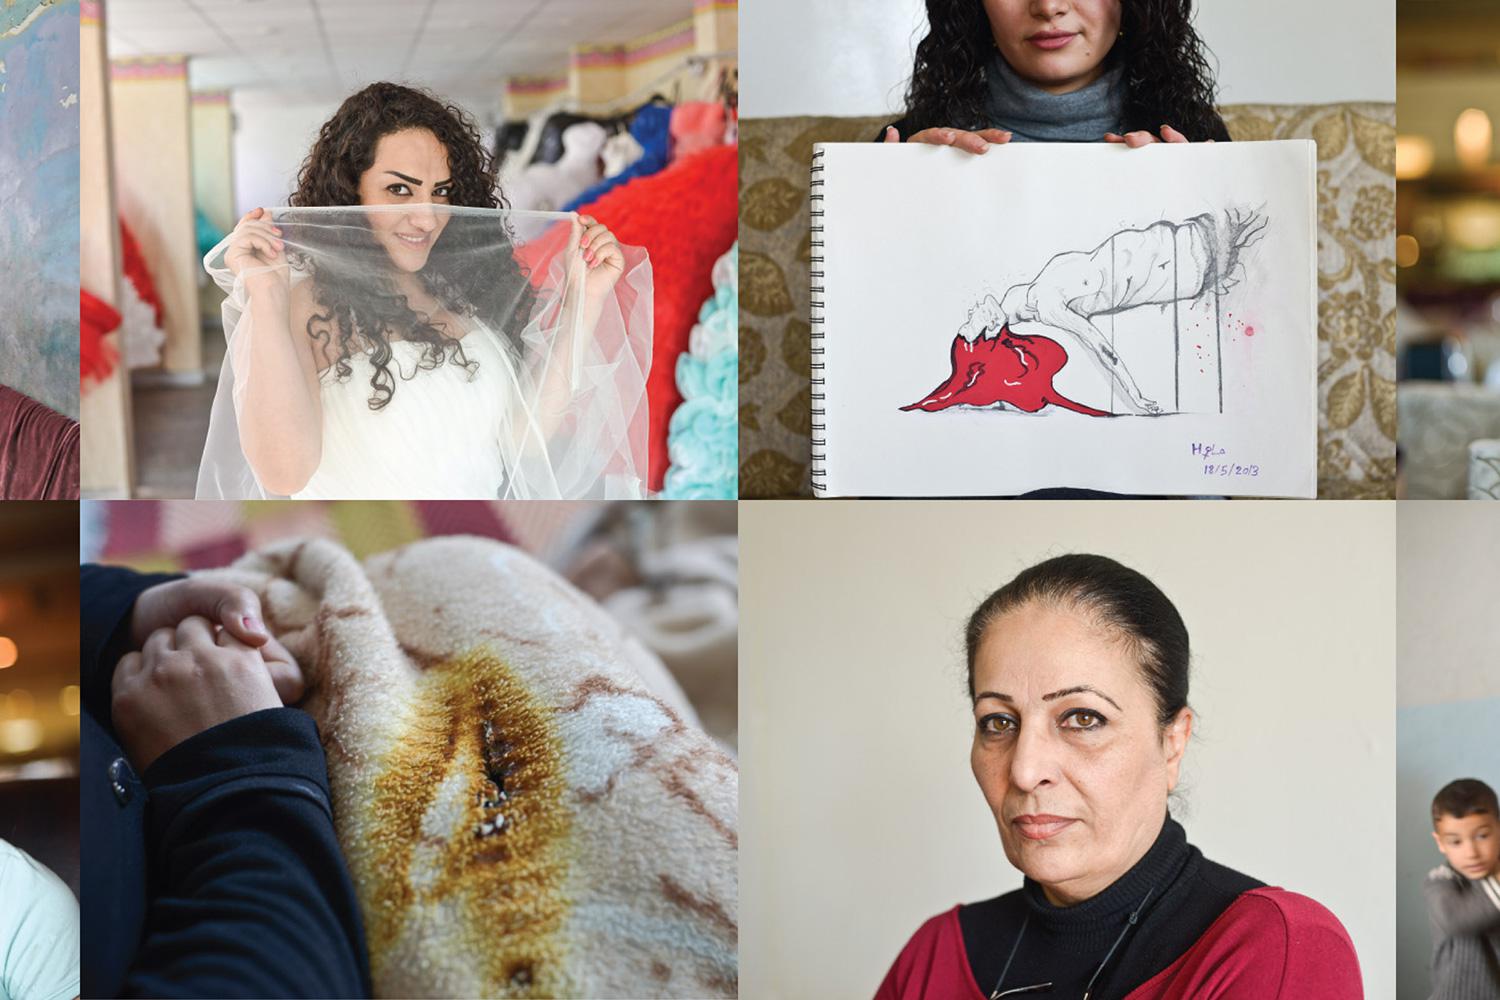 Some of the Syrian women profiled in this report, all of whom are now refugees in Turkey due to ongoing conflict and threats to their personal freedom and security in Syria.